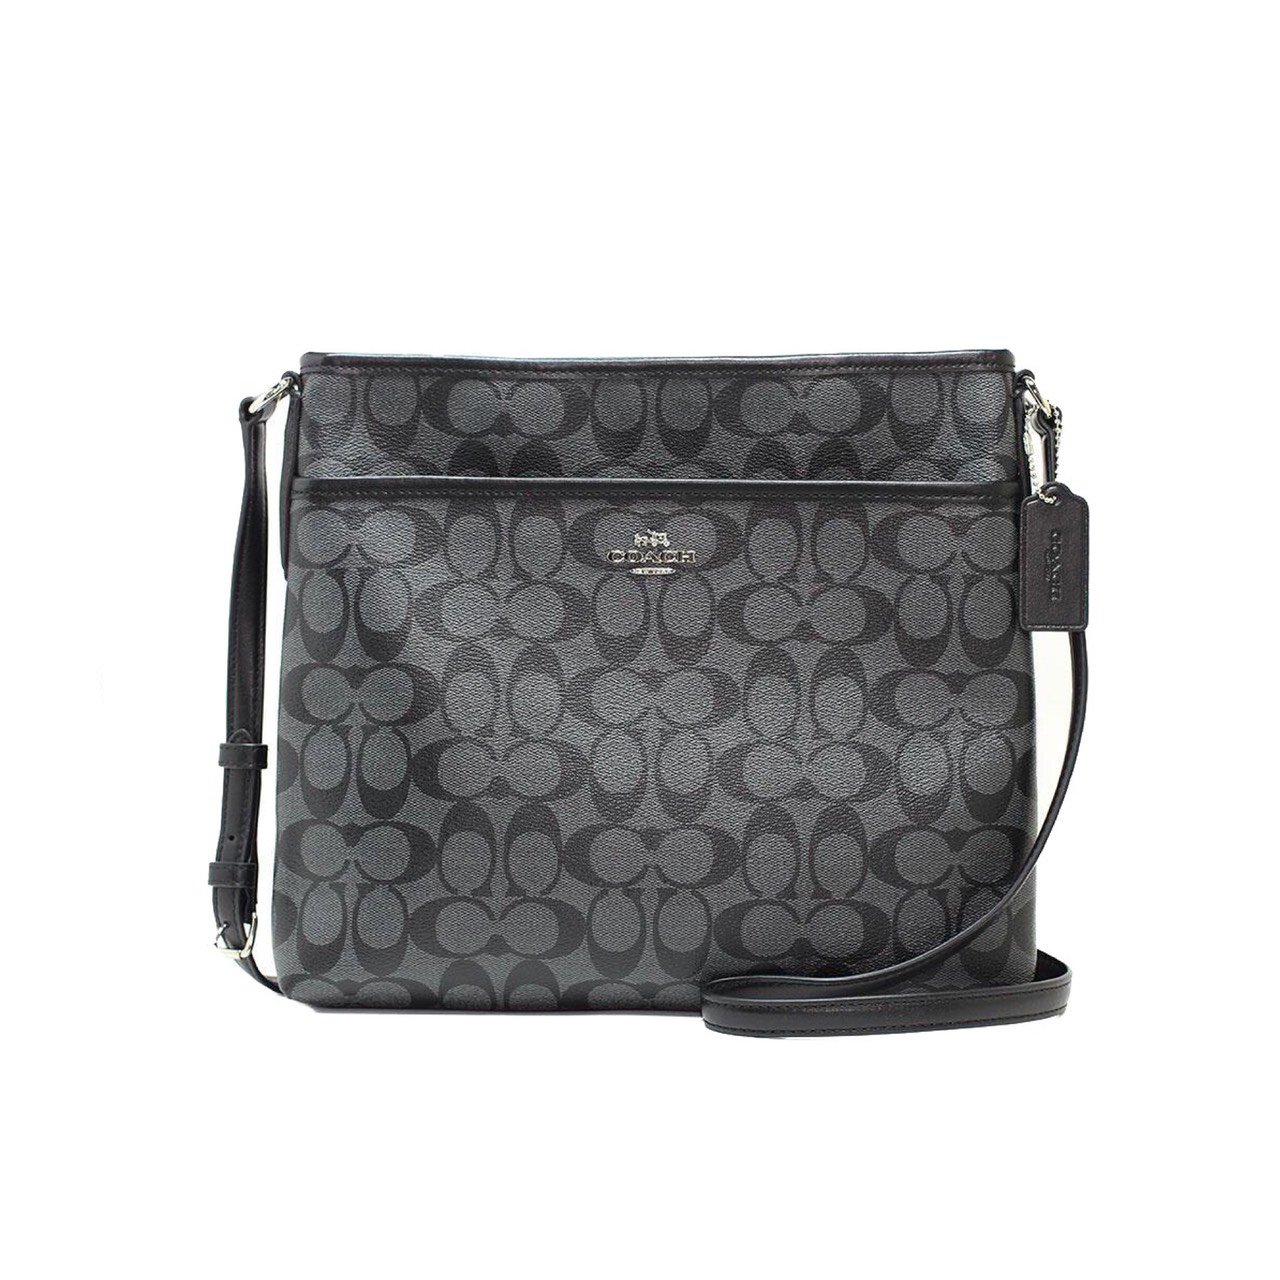 New Coach File CrossbodyBag in Chacoal/Black SHW